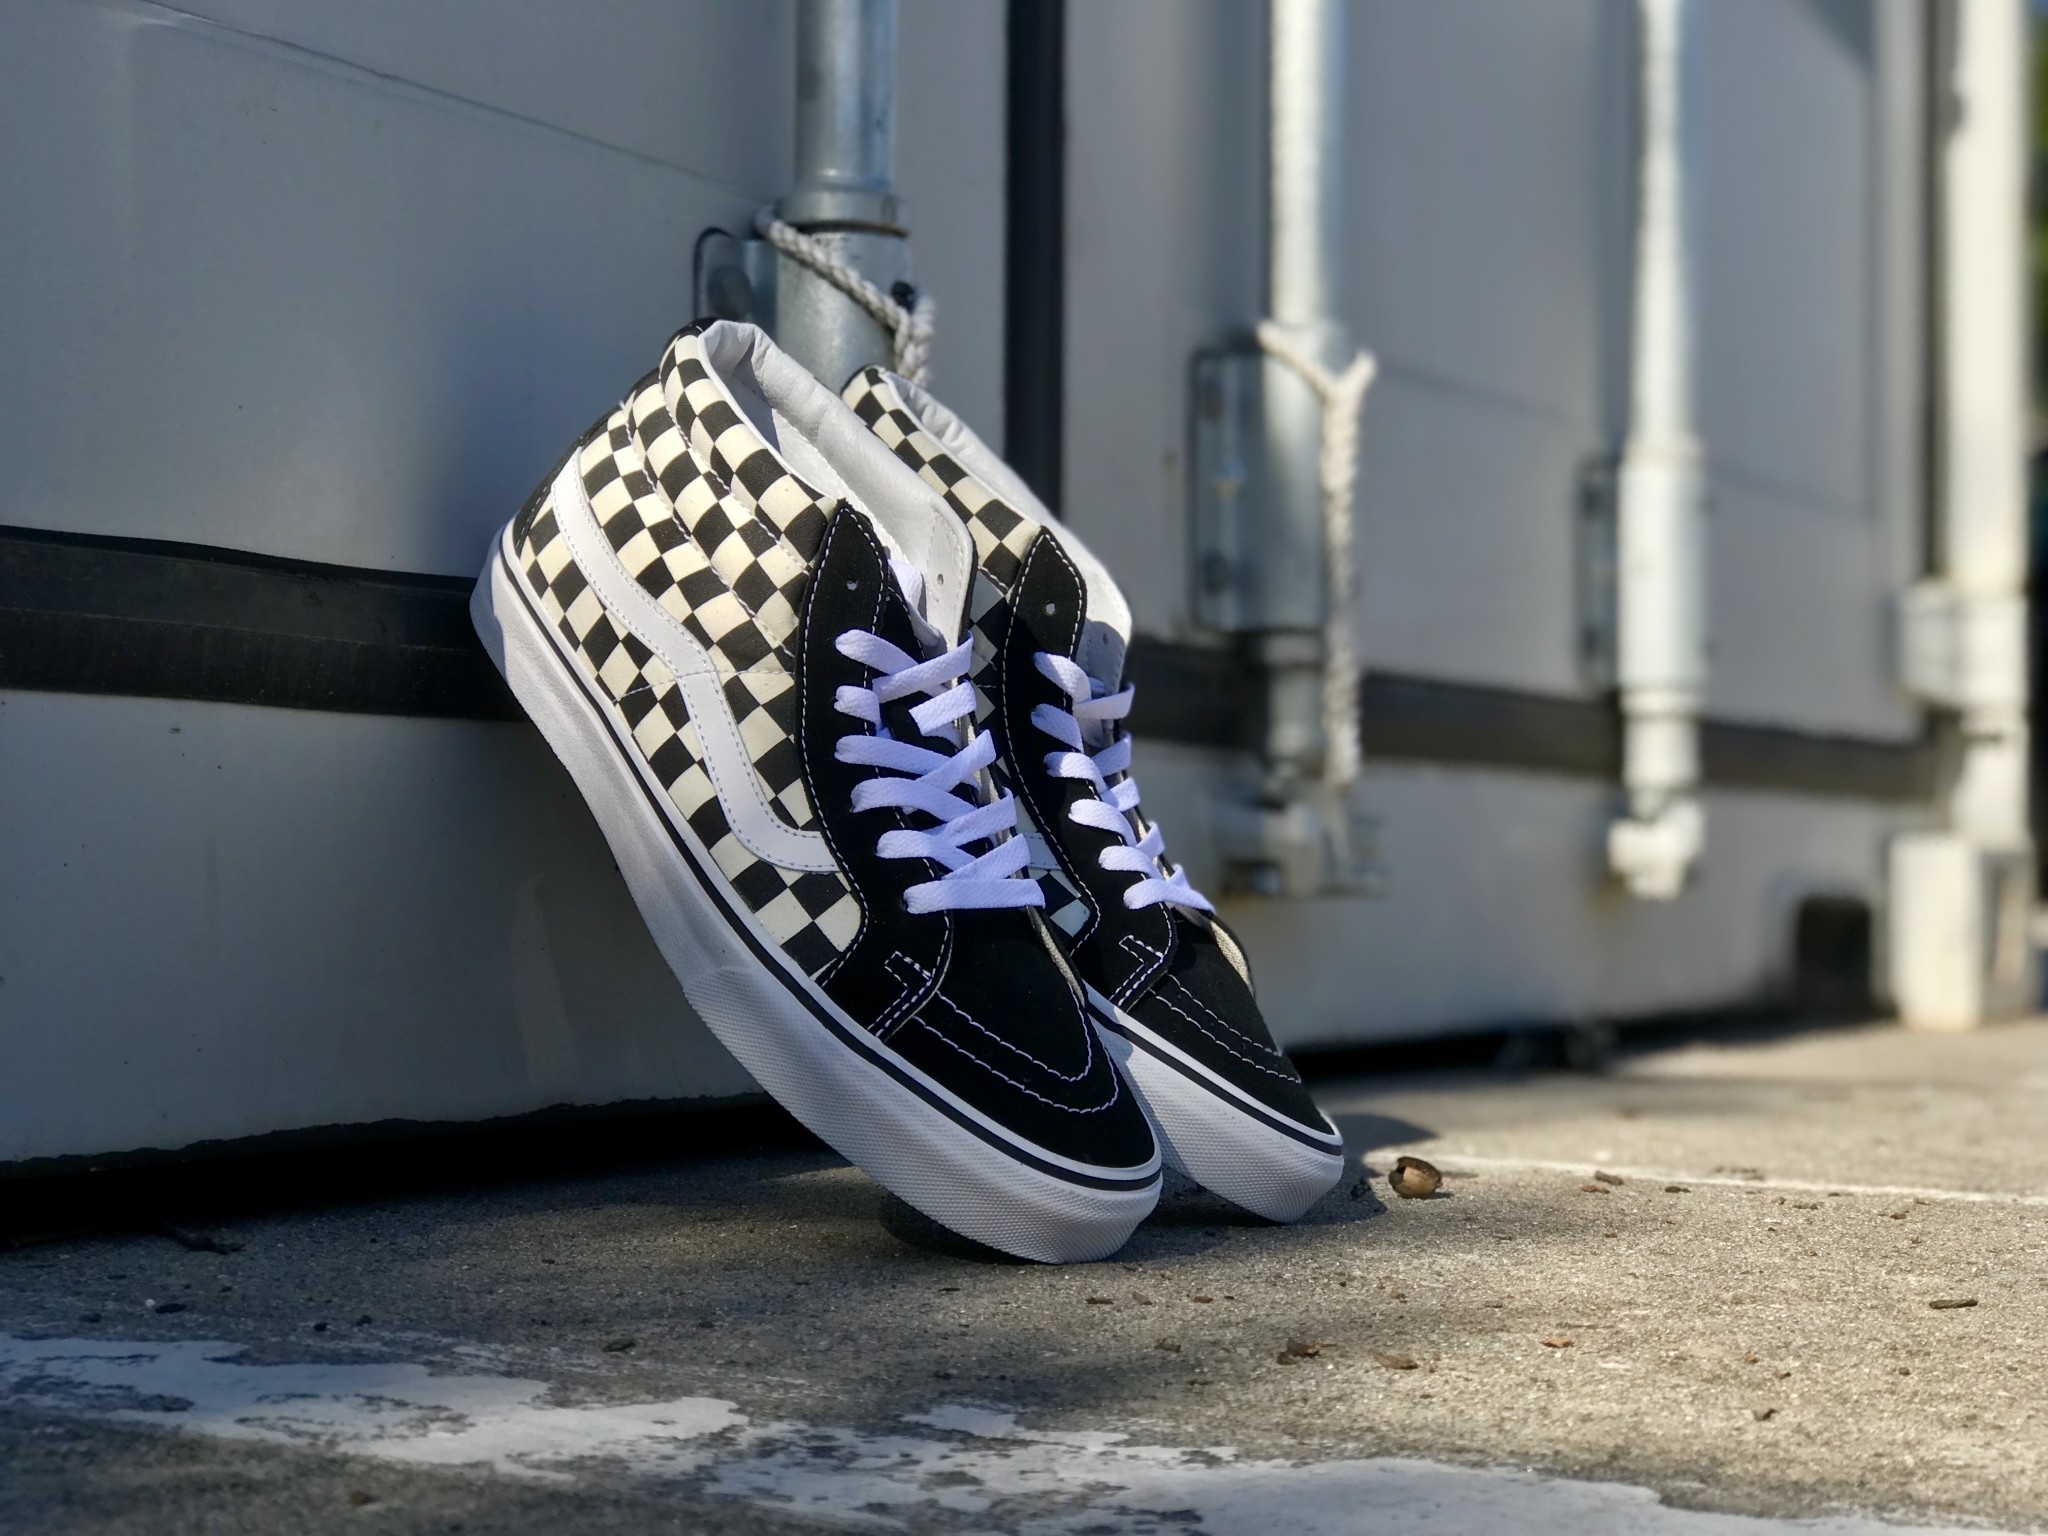 Sk8 Mid Reissue Checkerboard - Eight One